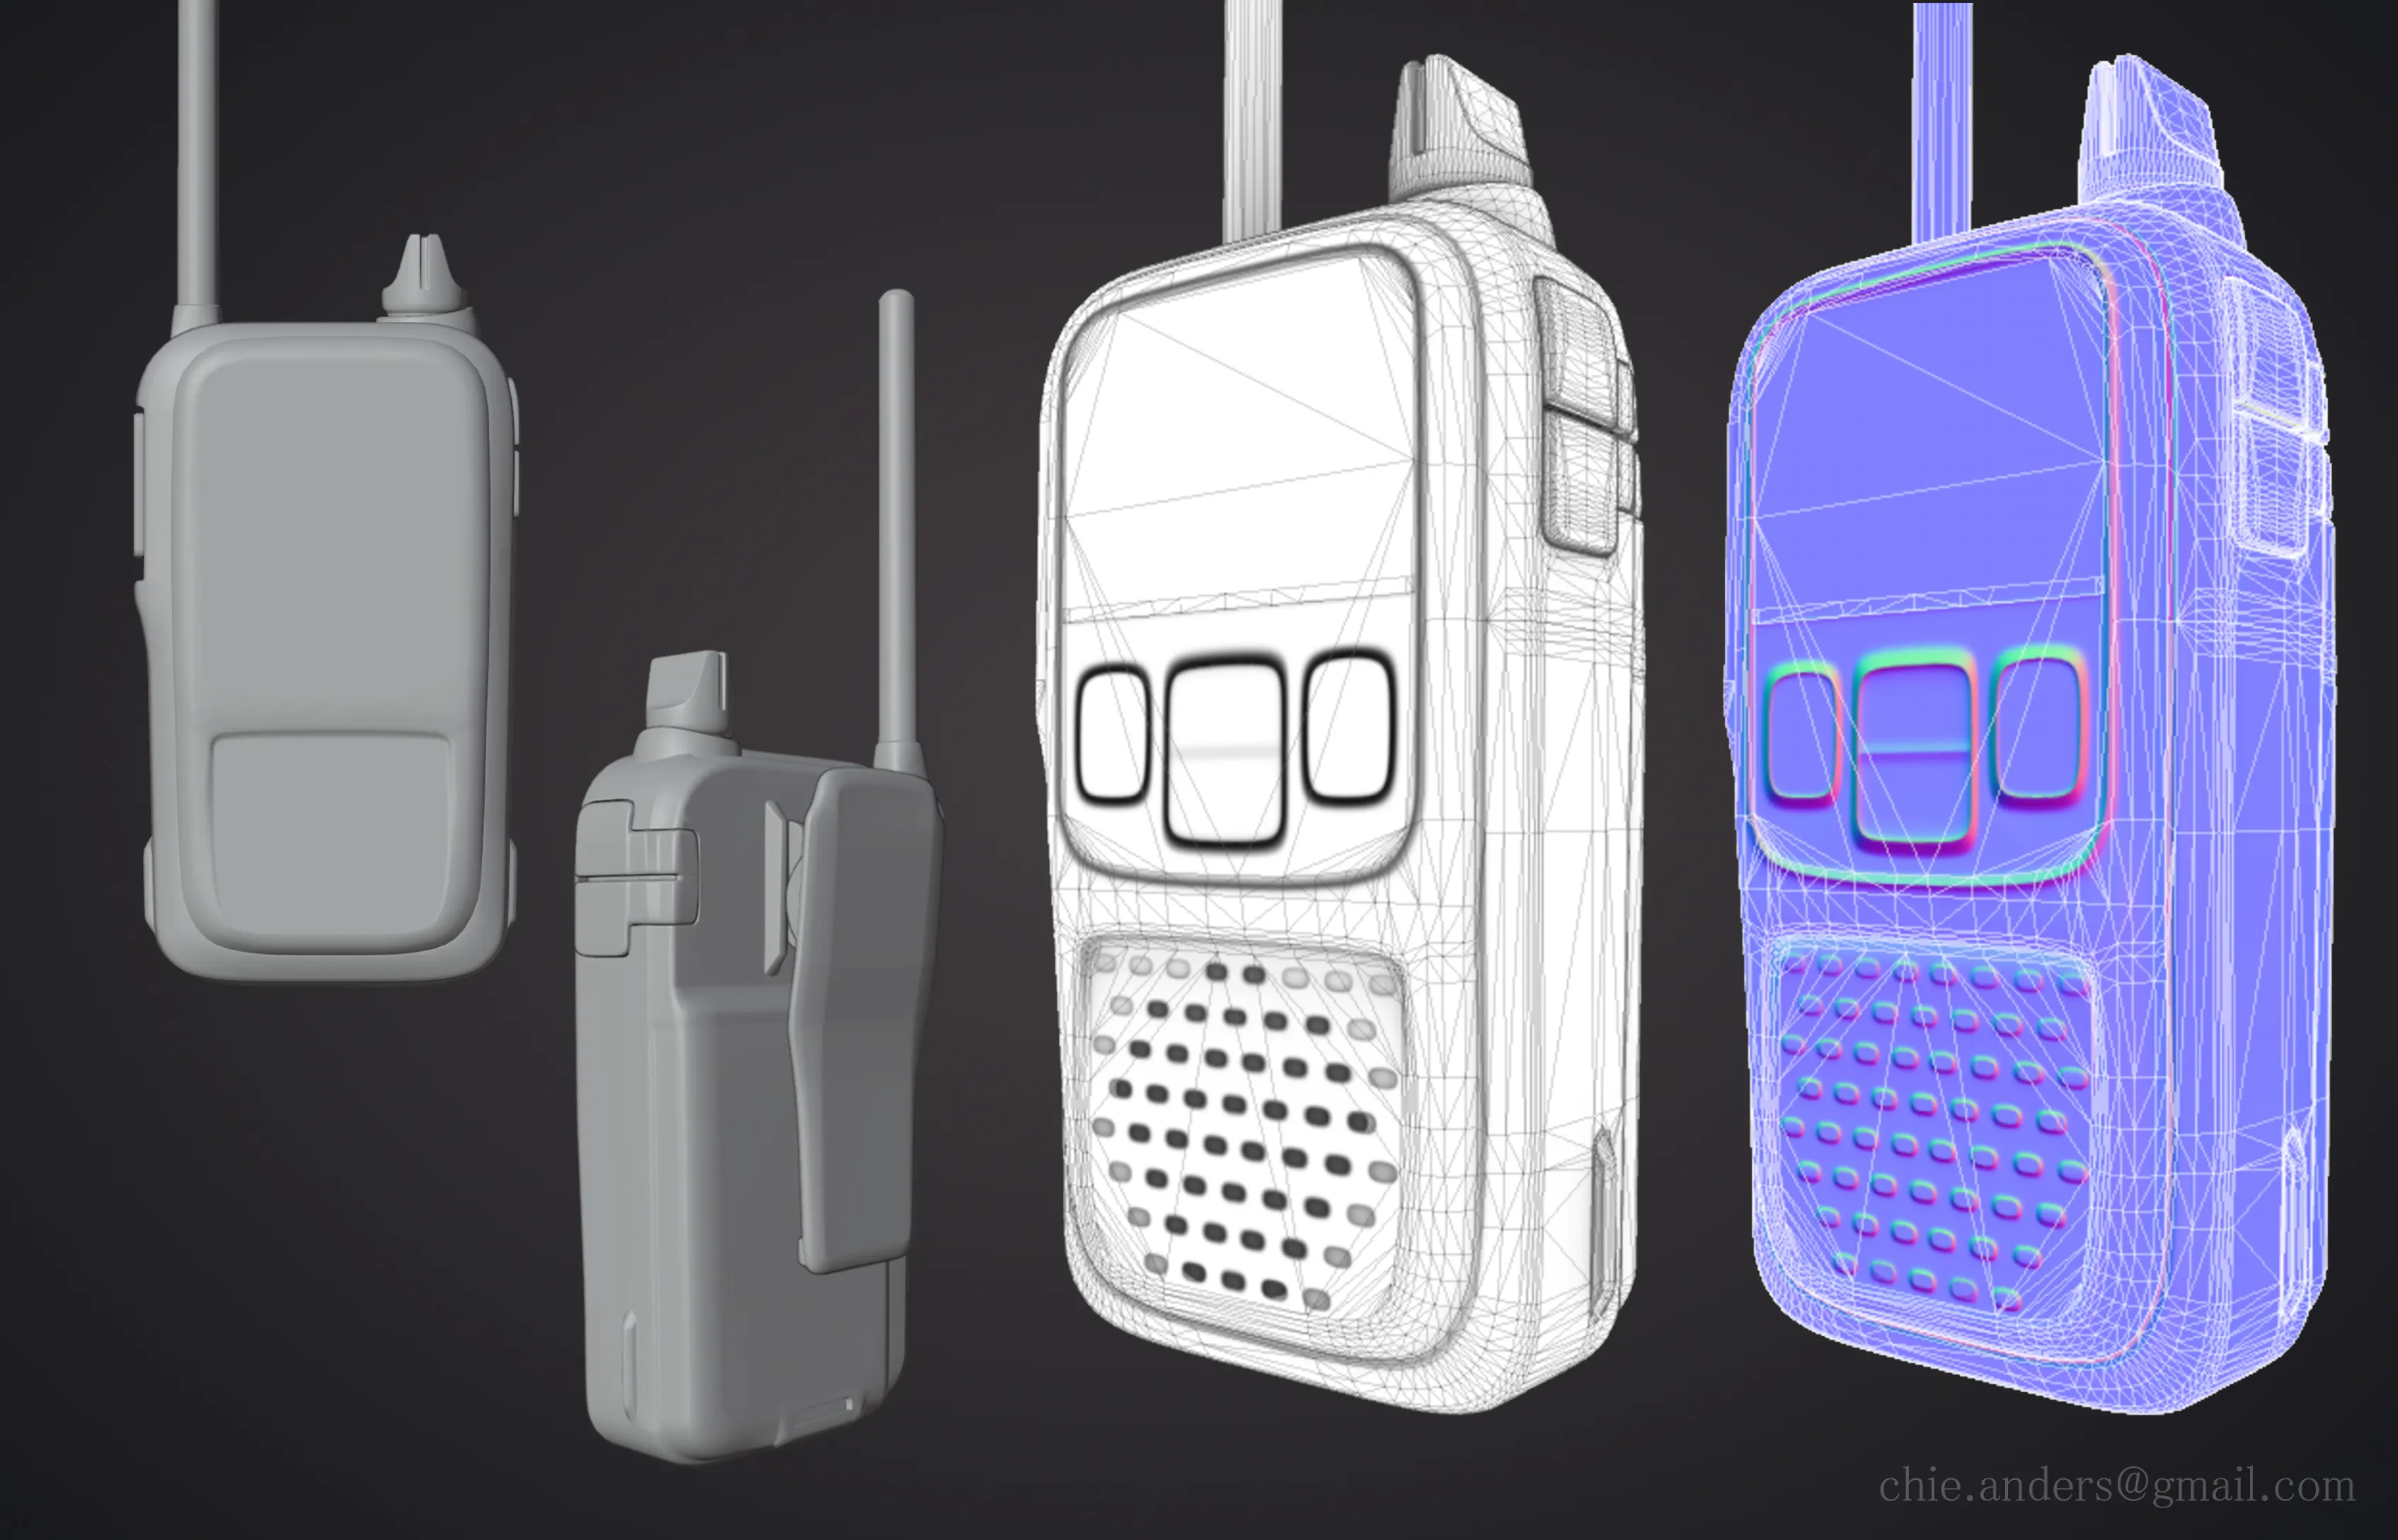 Hand-held radio normal map, occulusion map, and wireframe